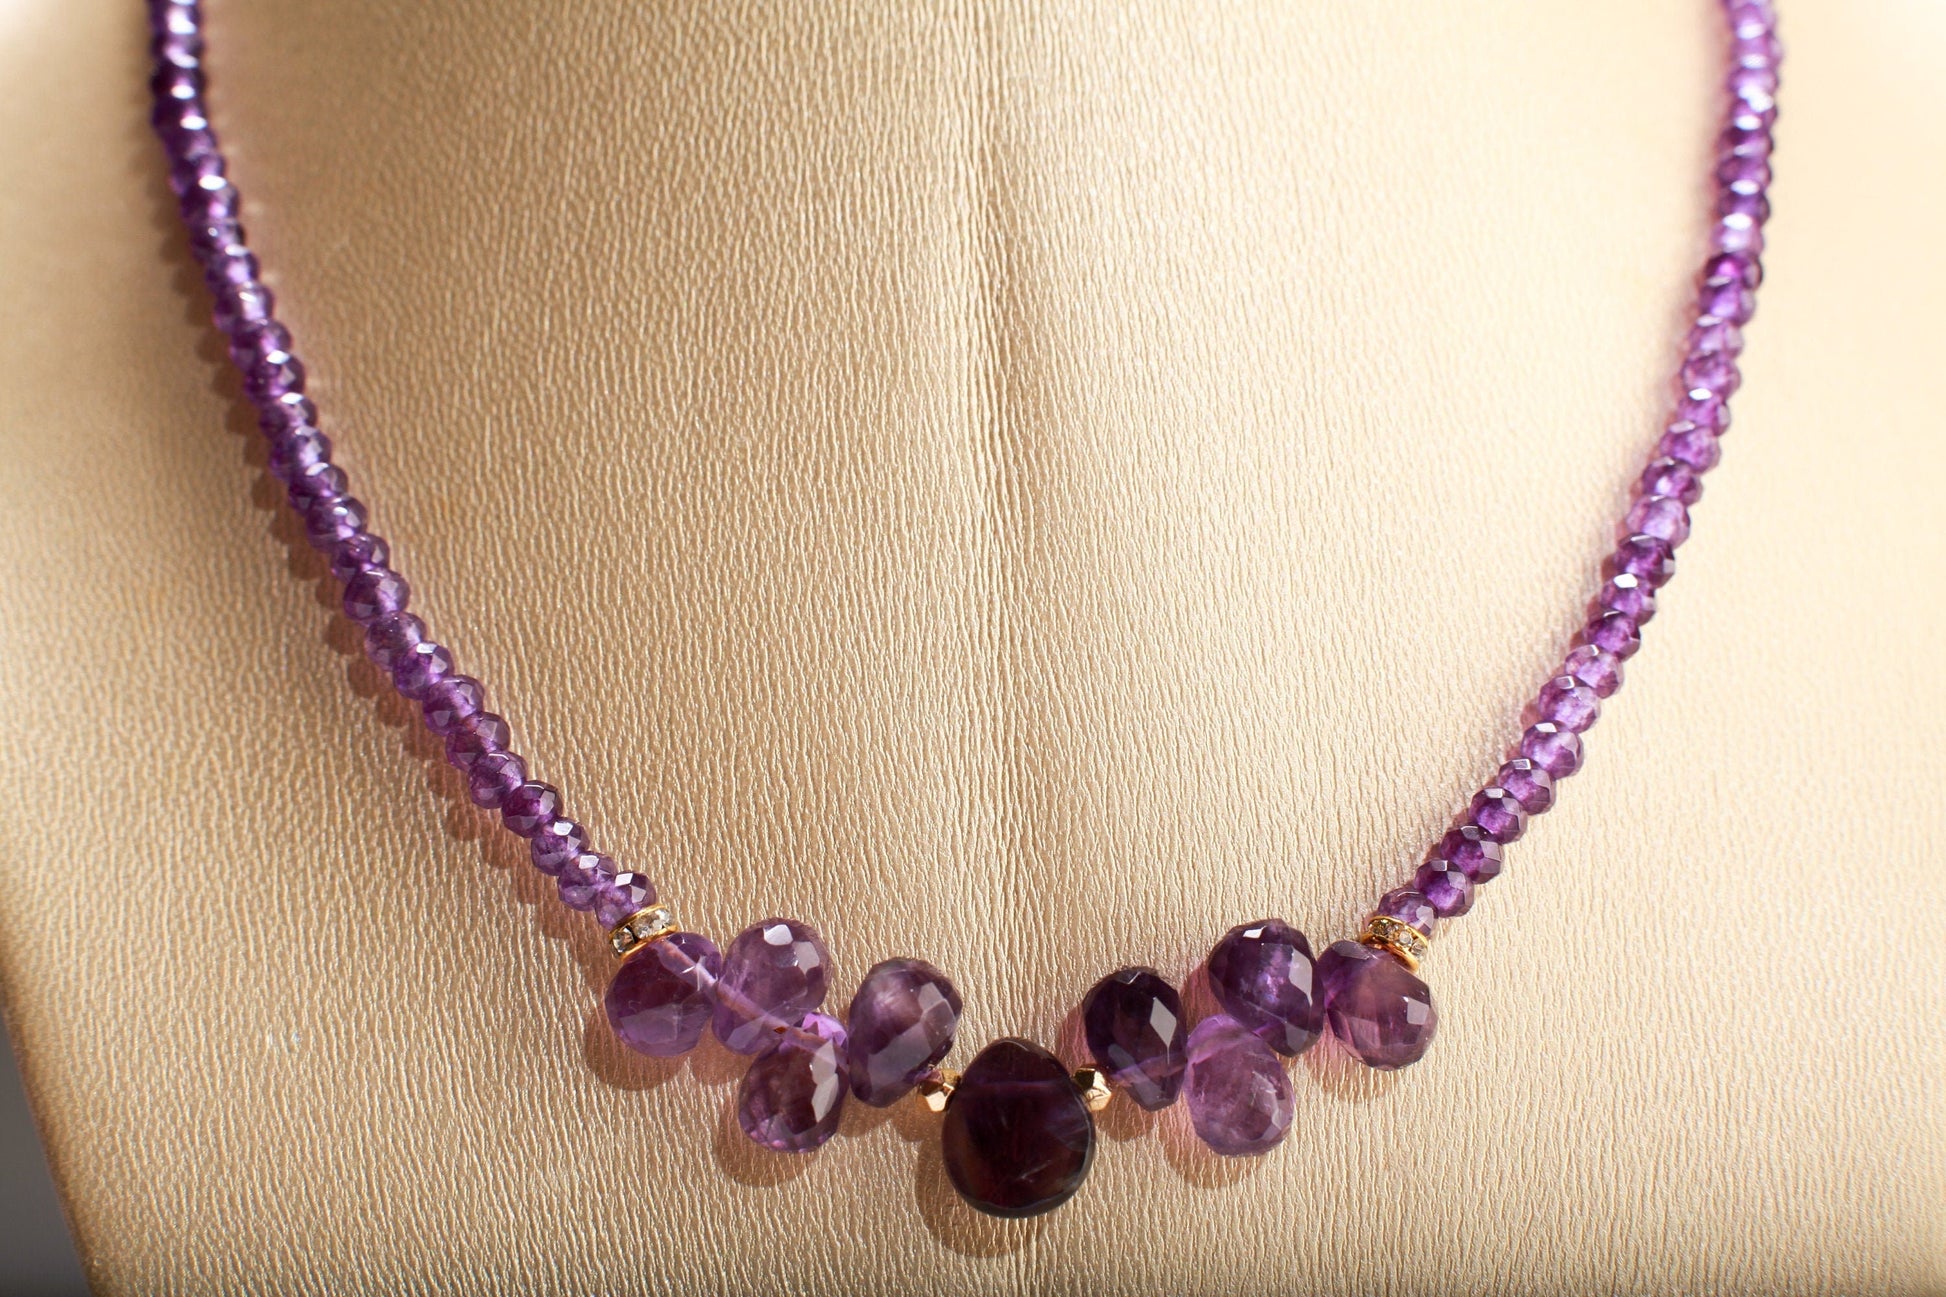 Natural Amethyst Faceted Briolette accent with Teardrop centerpiece 16&quot; Necklace with 2&quot; Extension Chain